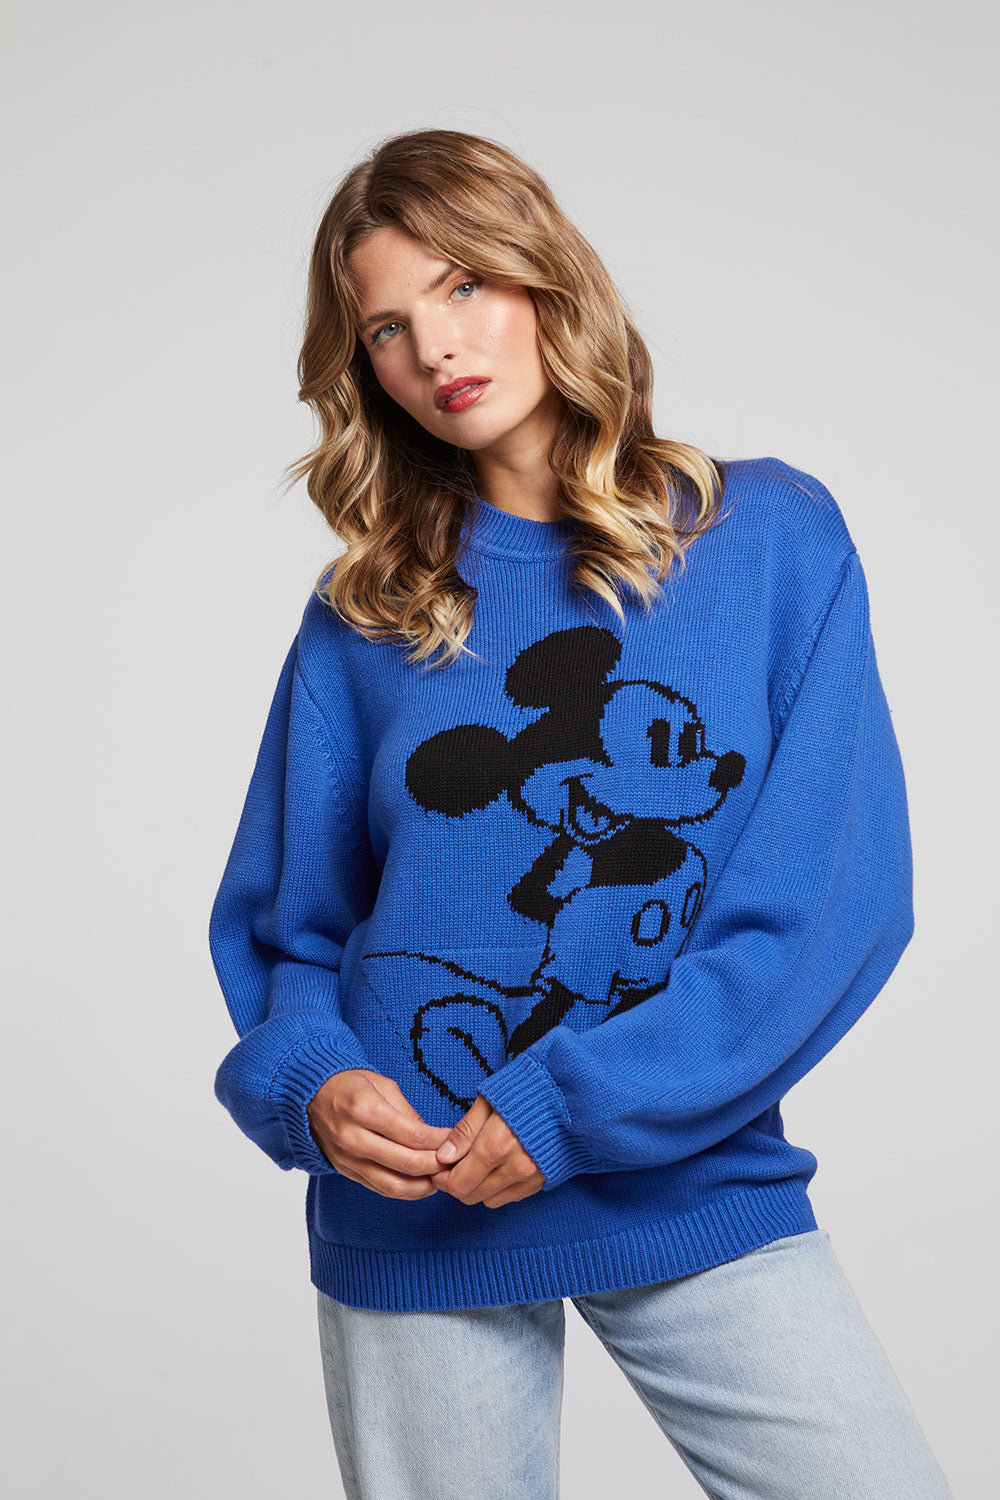 DisneyMickey Mouse Pullover Sweater WOMENS chaserbrand